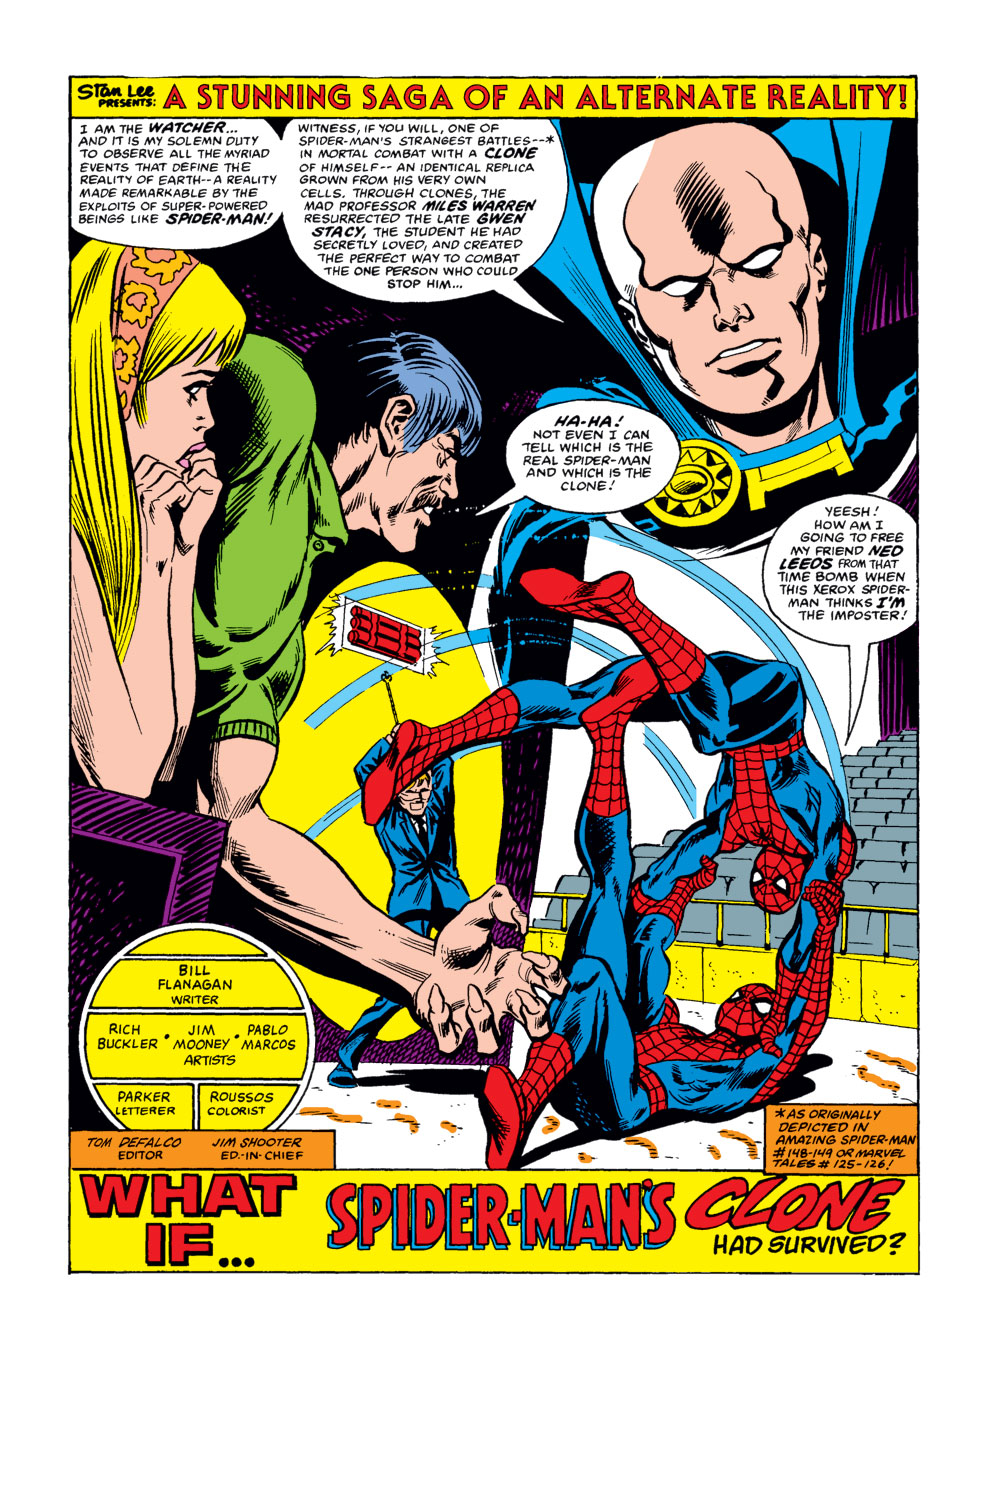 What If? (1977) issue 30 - Spider-Man's clone lived - Page 2